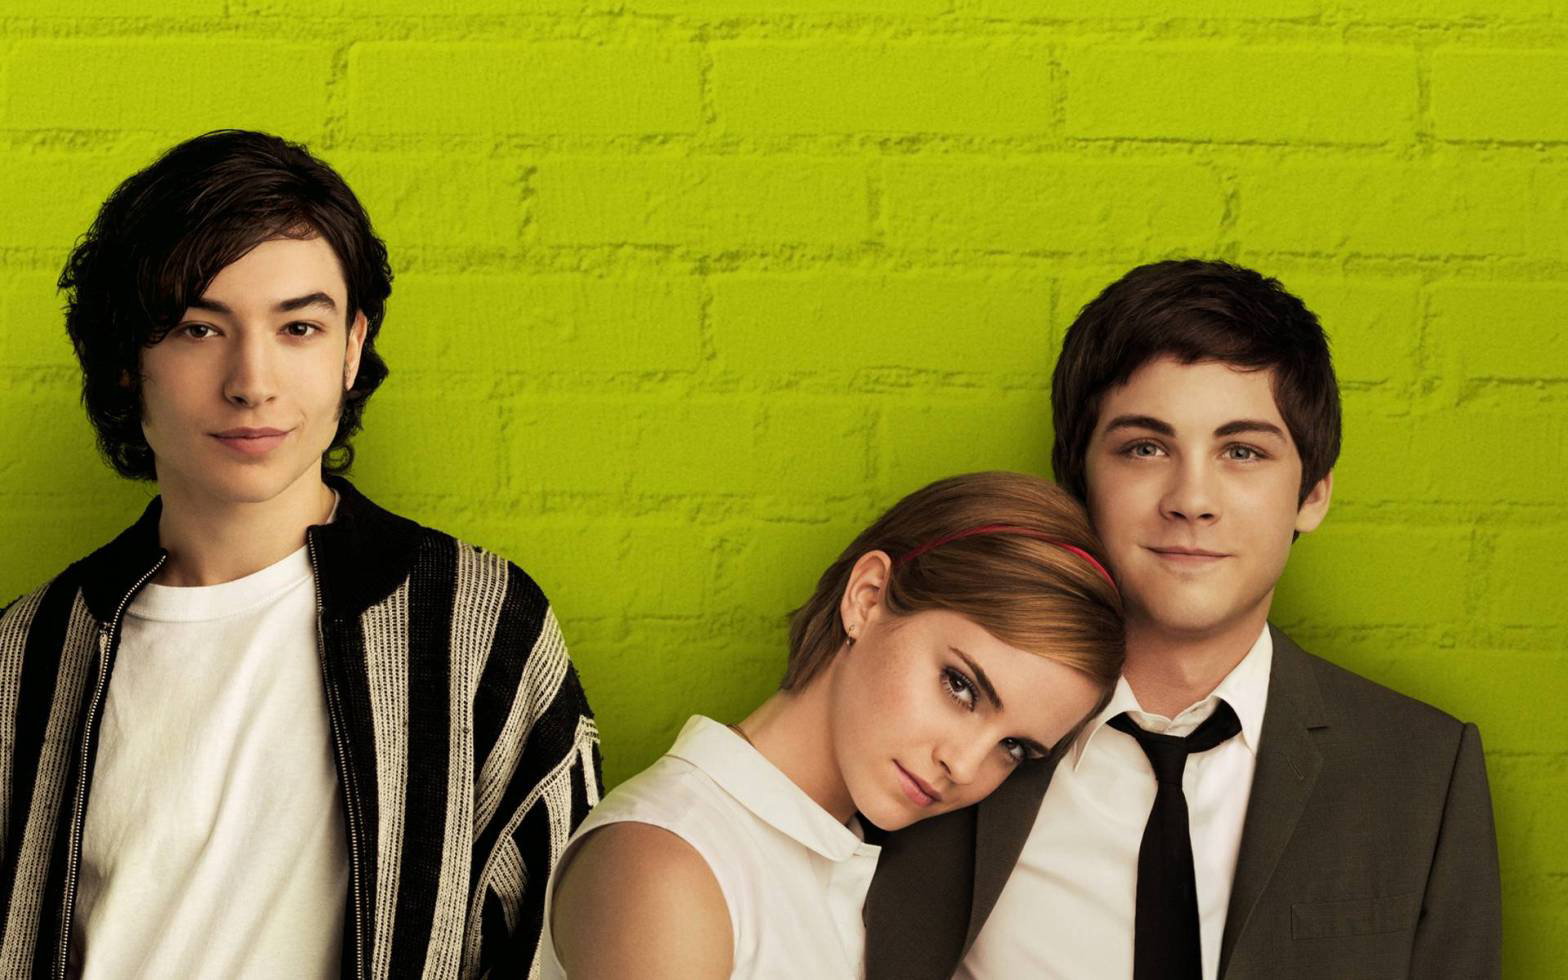 The Perks of Being a Wallflower The Perks of Being a Wallflower